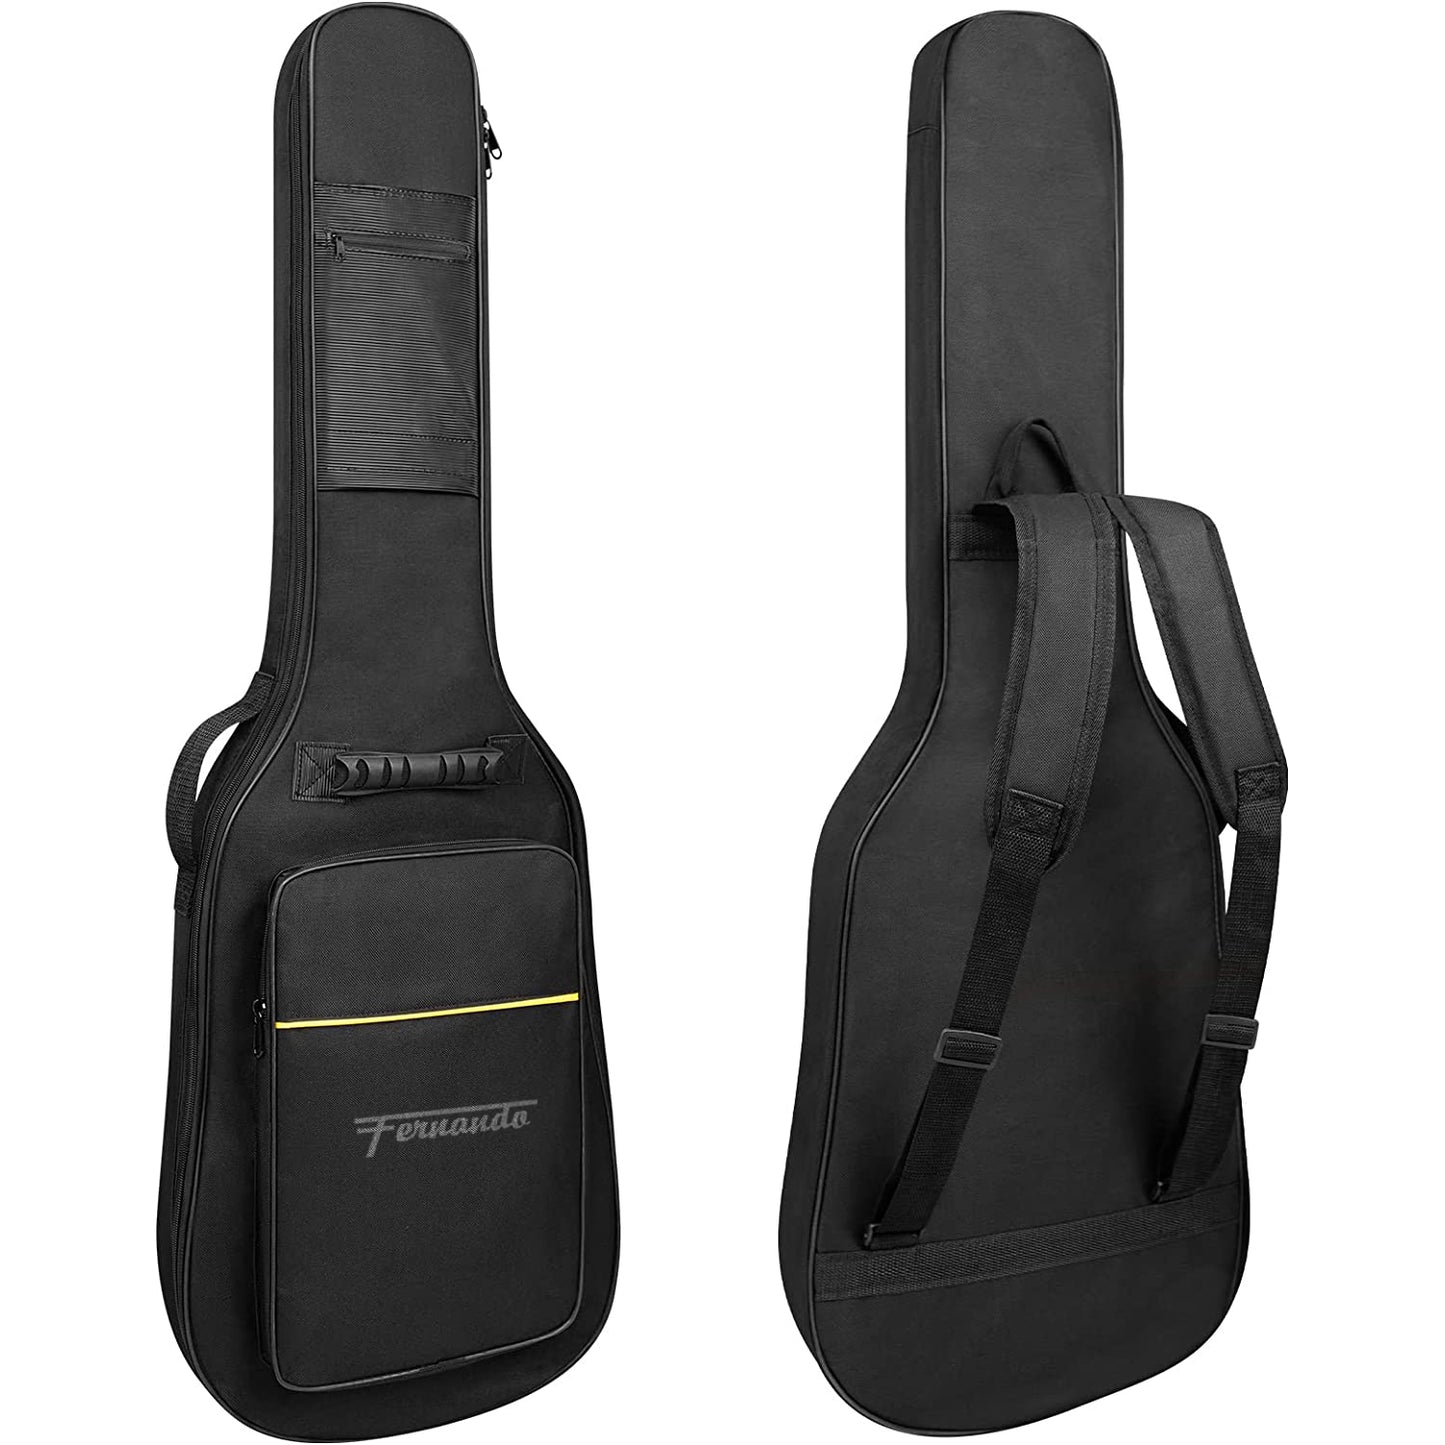 Fernando 47" GT-F1BASS Electric Bass Guitar Gig Bag with Foam Padding and Water Resistant Oxford Cloth Lining and Two Accessory Pockets